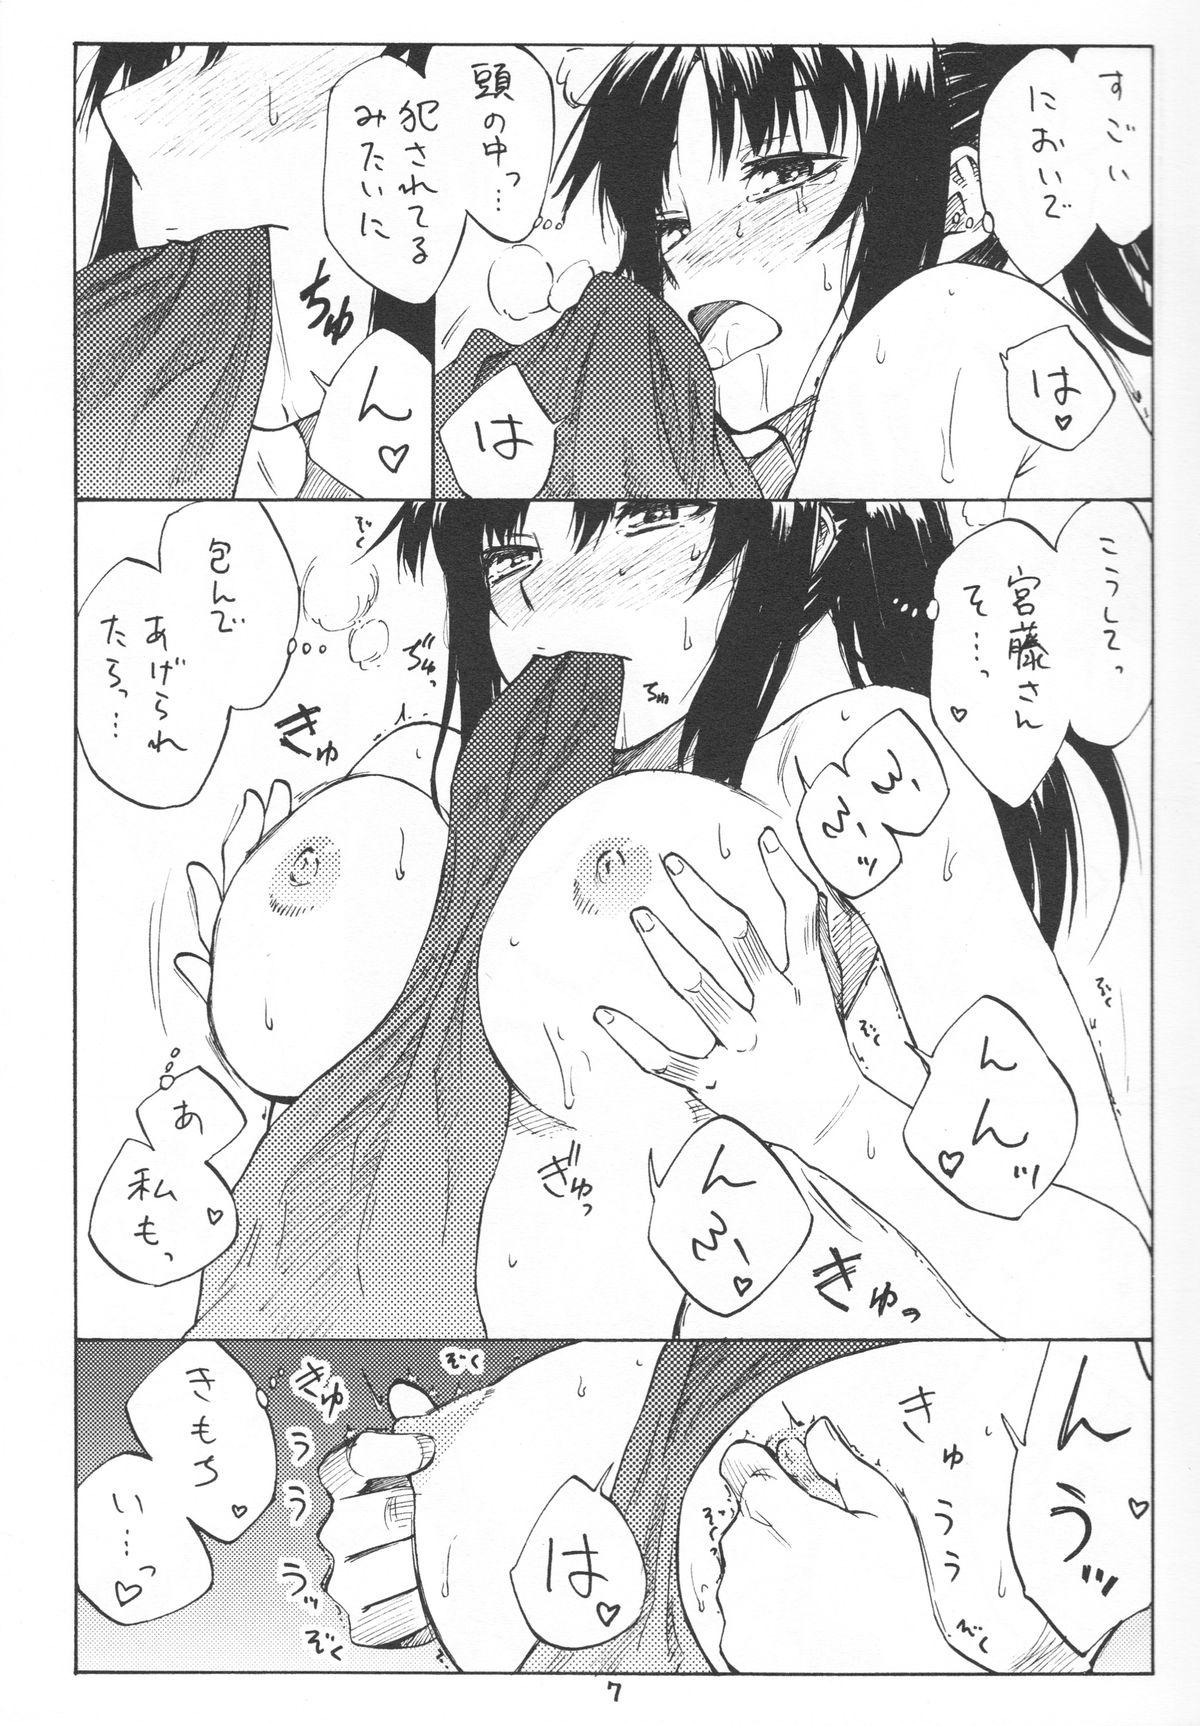 Women Sucking Dick Greatest! - Strike witches Oral Sex - Page 7